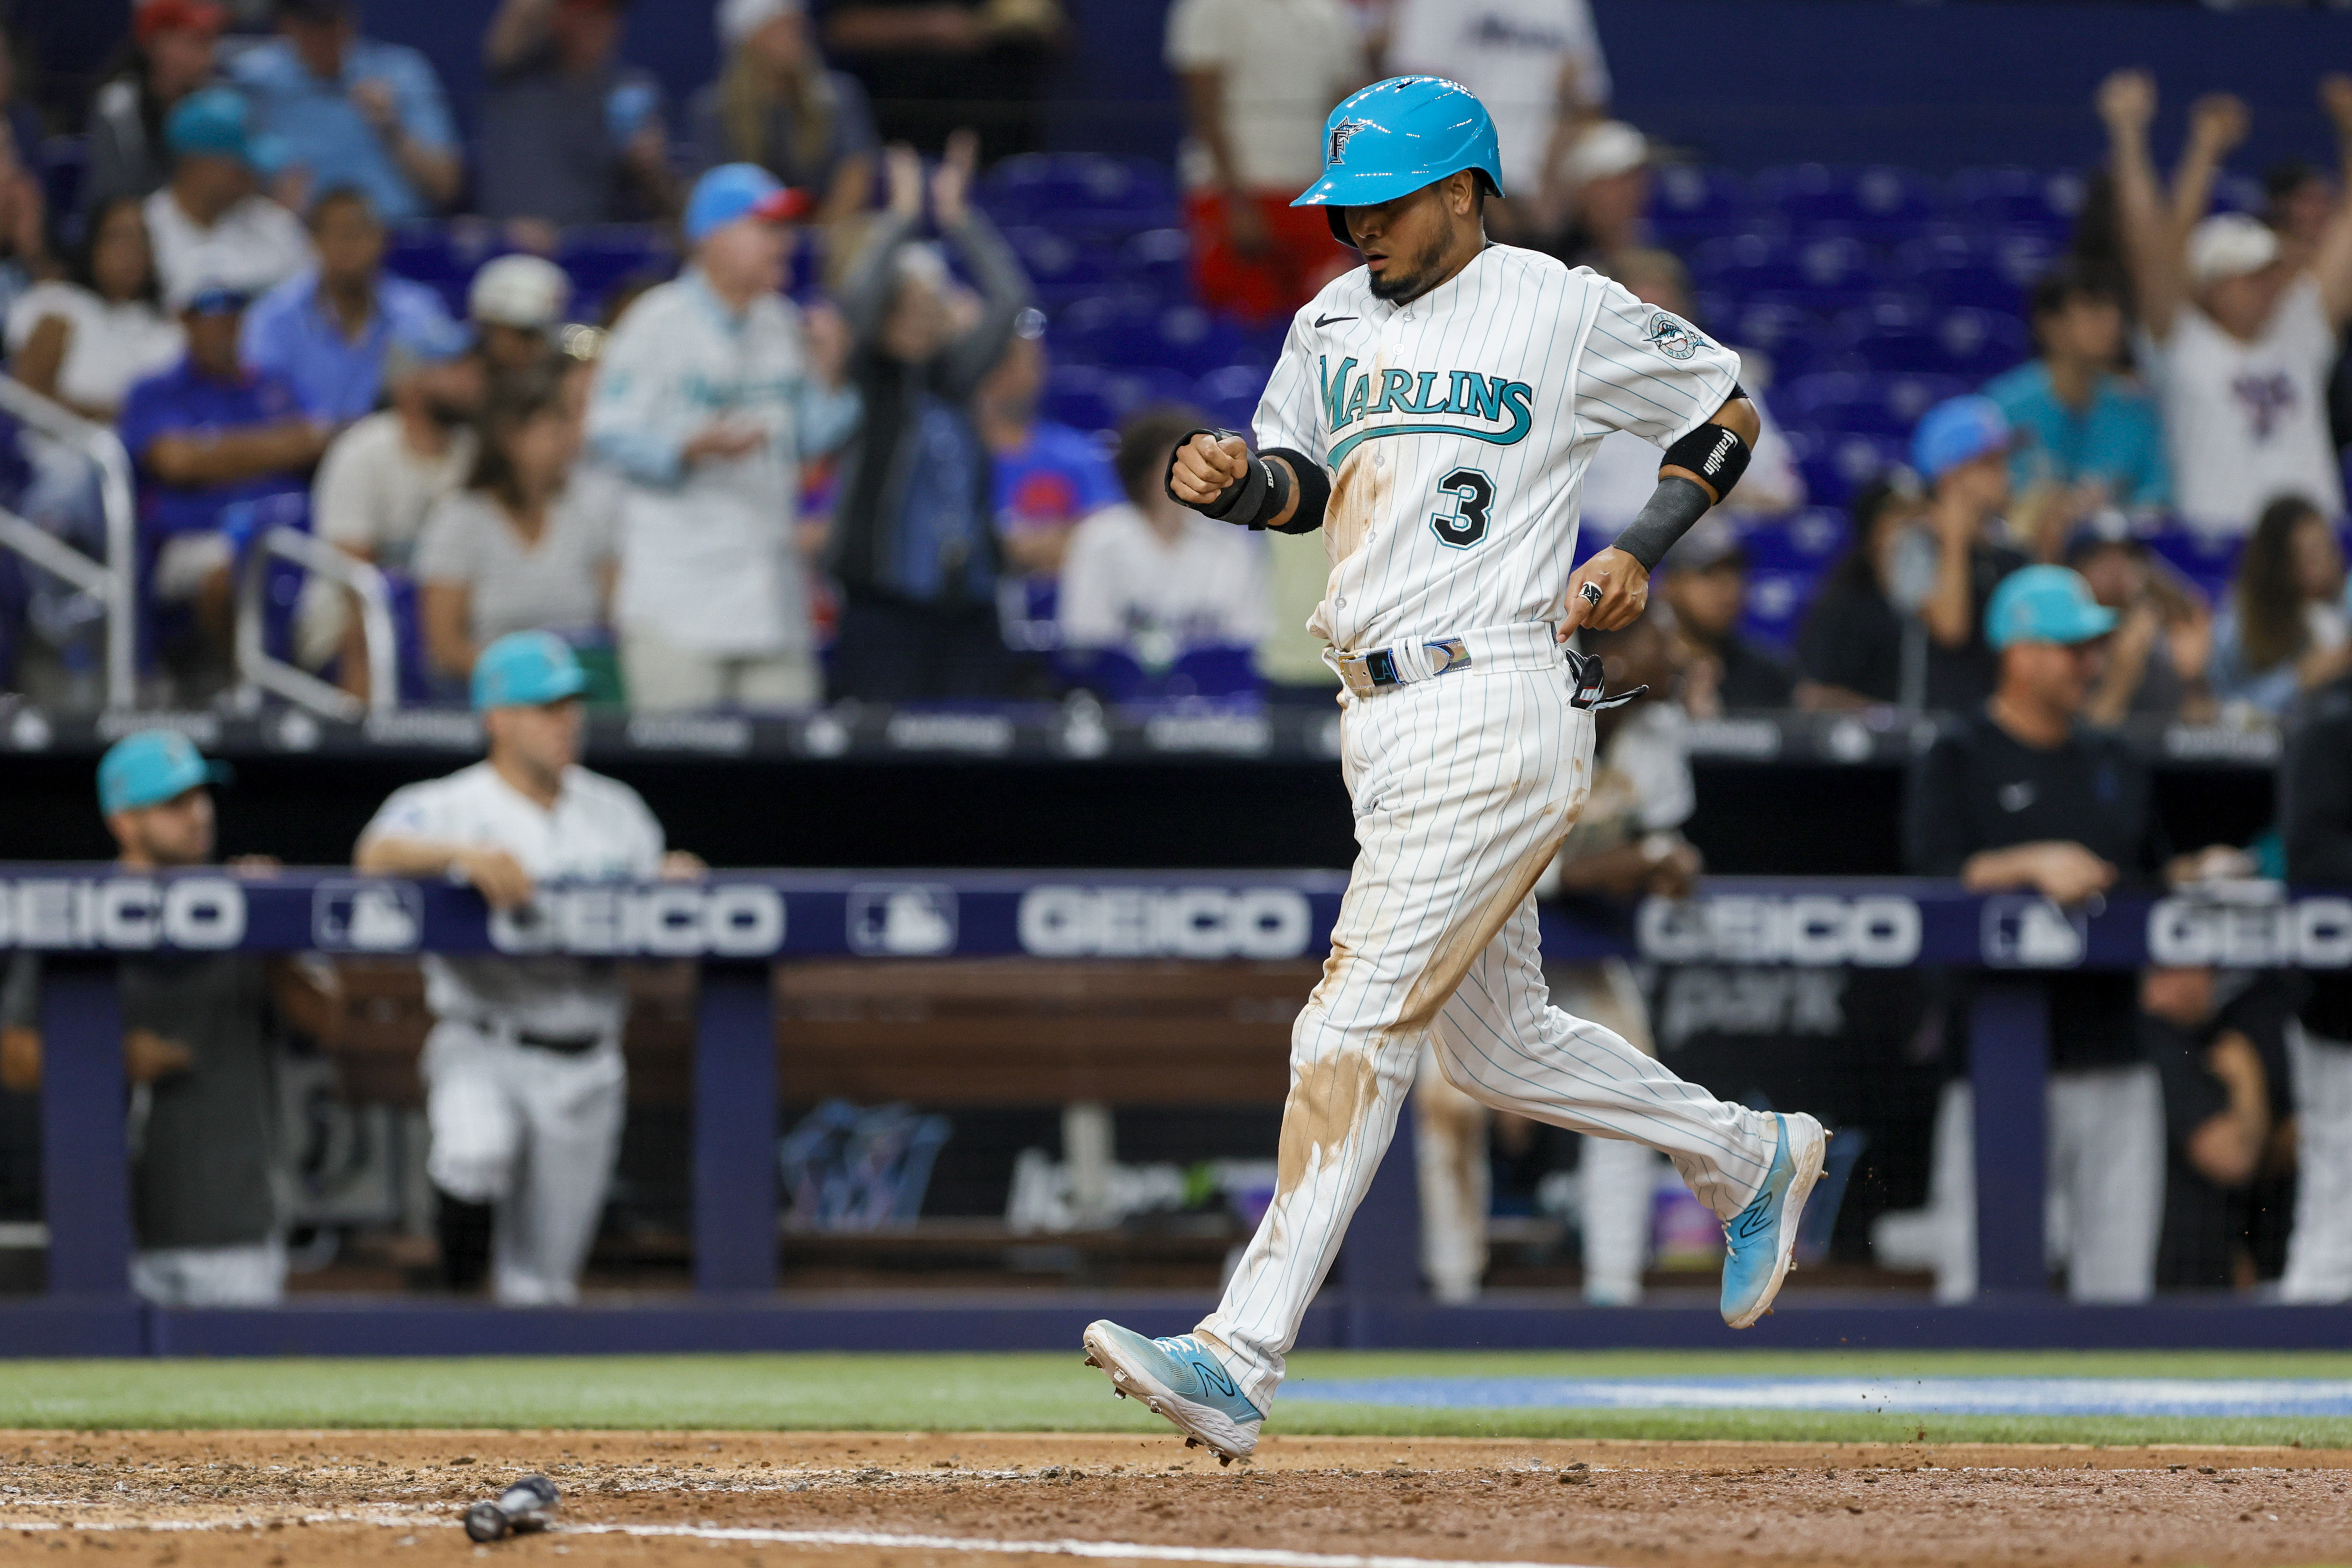 Jean Segura hits walk-off single in Marlins win over Cubs